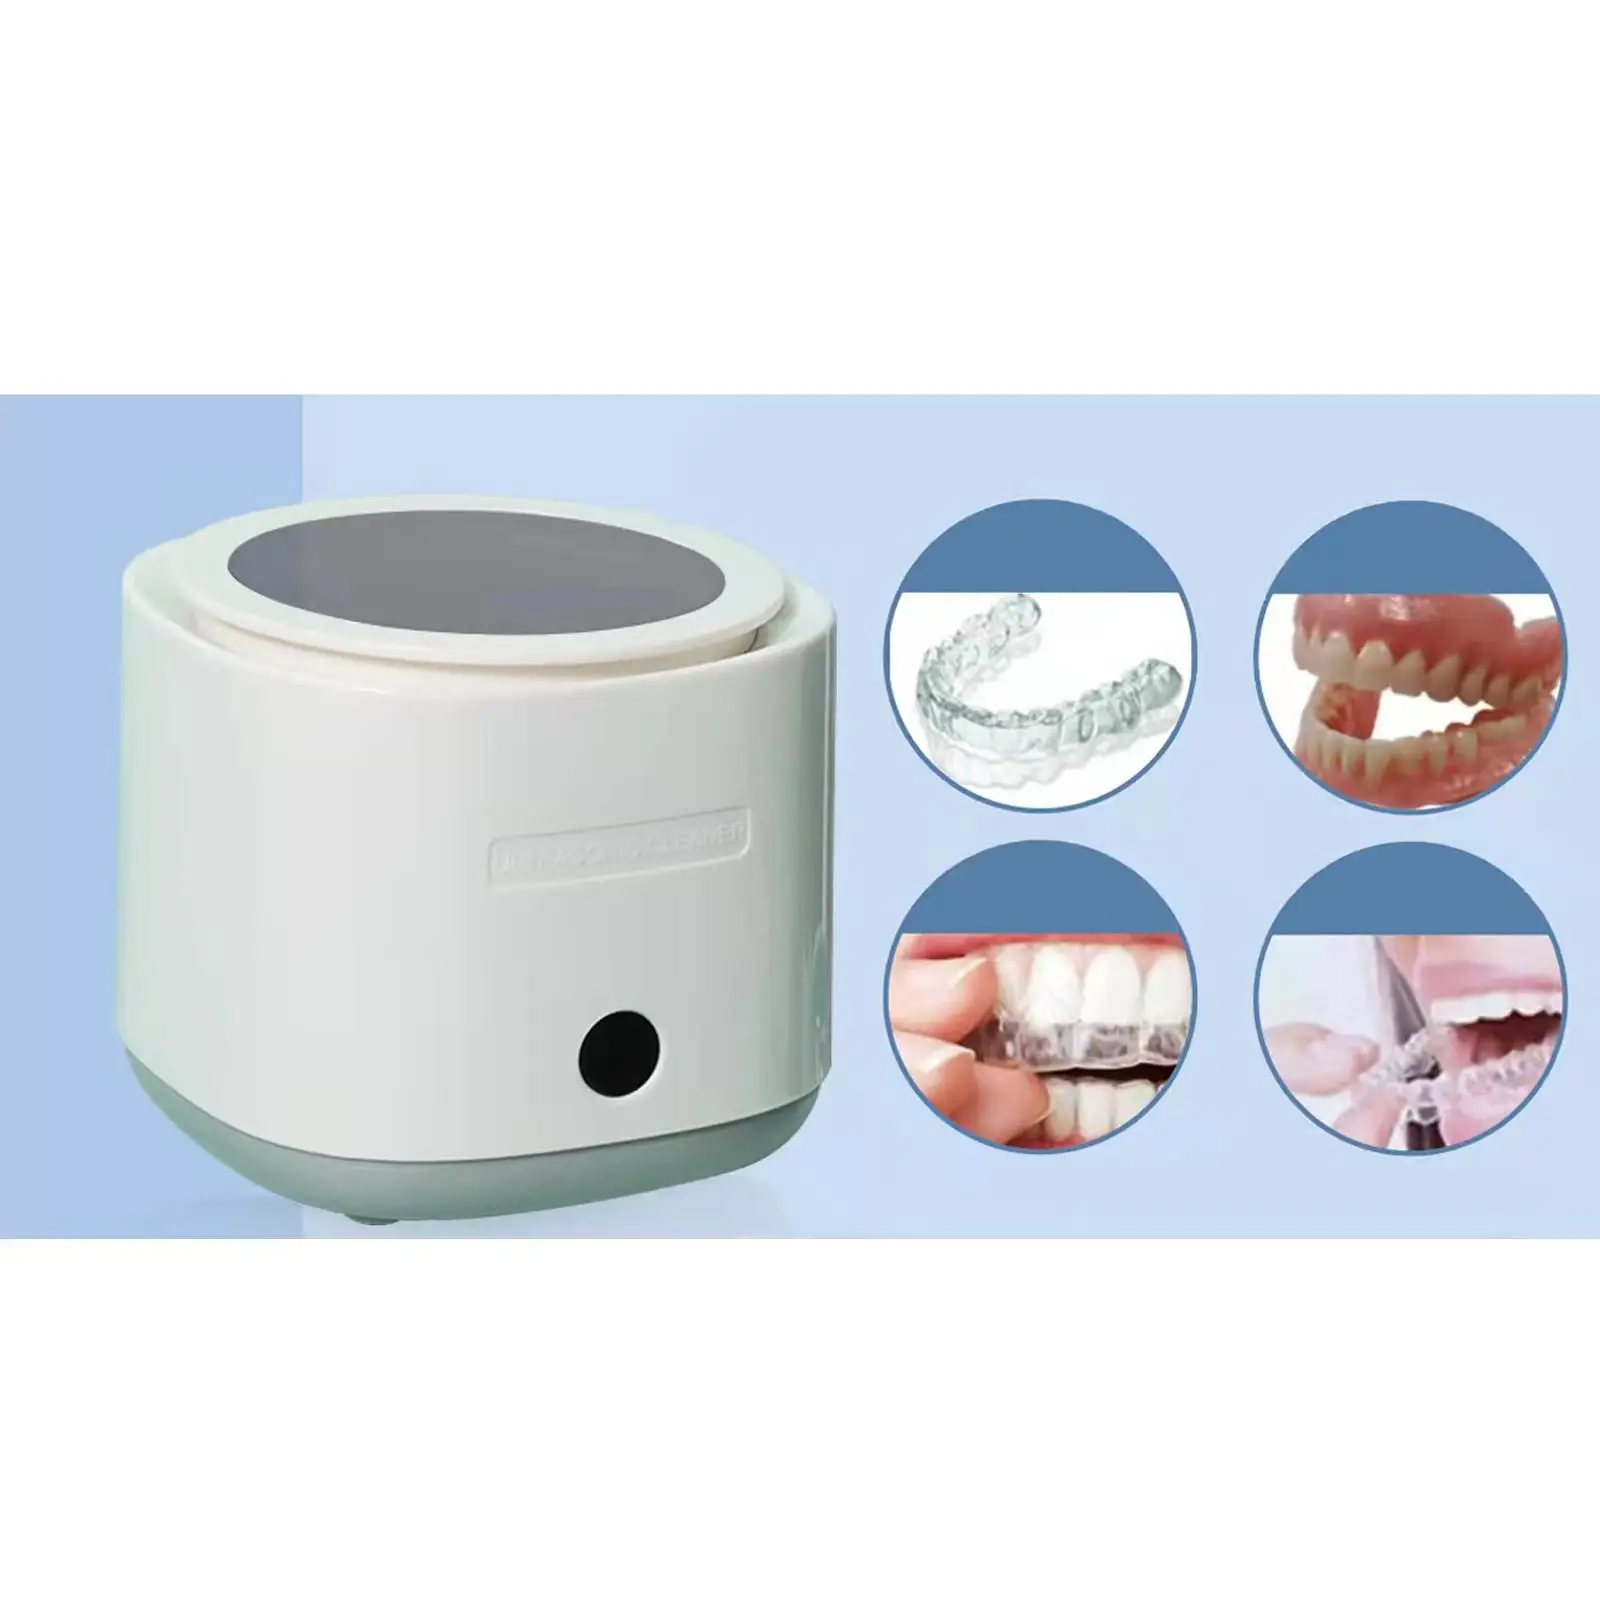 Electric Jewelry Cleaner Machine Ultrasonic Vibrating for Polishing Rings Necklace Dentures Professional Cleaning Tank Accessory